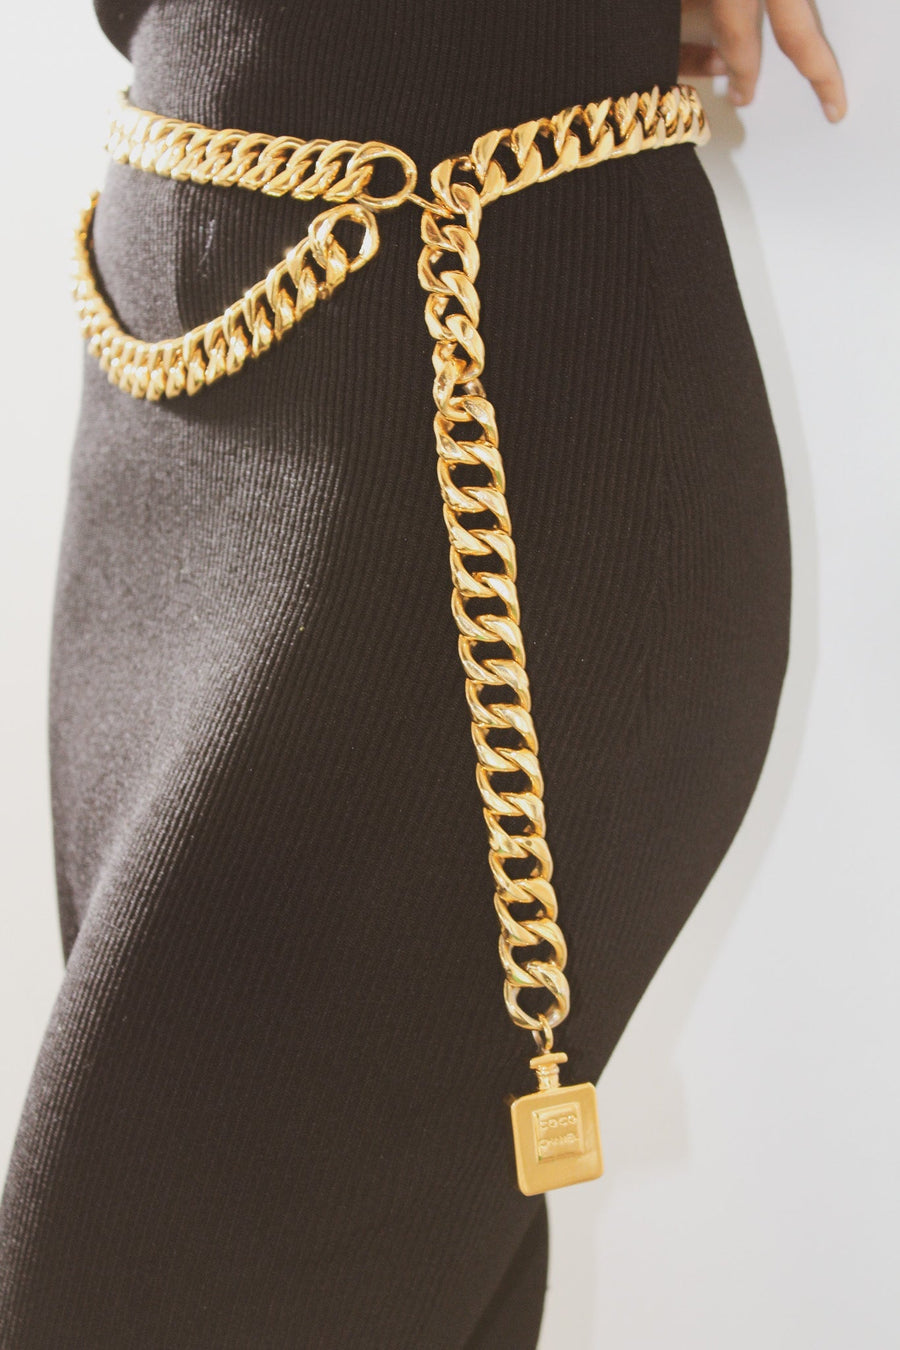 Vintage Chanel Chain Belt 1990s - Coco Chanel No 5 Belts Jagged Metal 